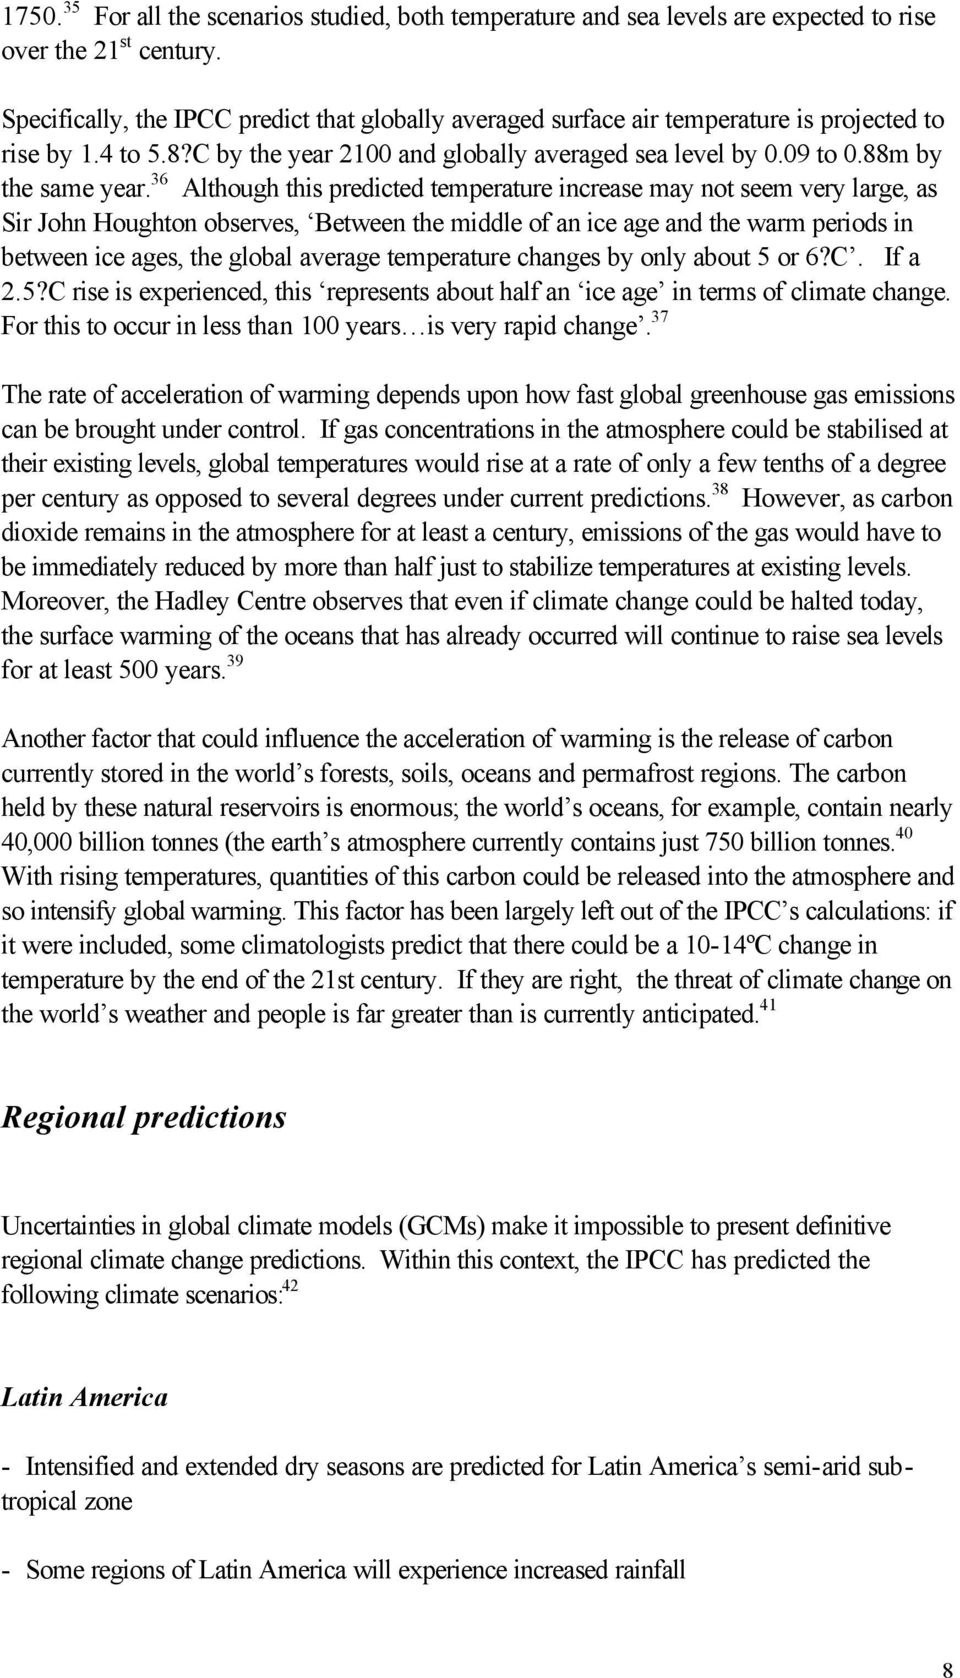 36 Although this predicted temperature increase may not seem very large, as Sir John Houghton observes, Between the middle of an ice age and the warm periods in between ice ages, the global average